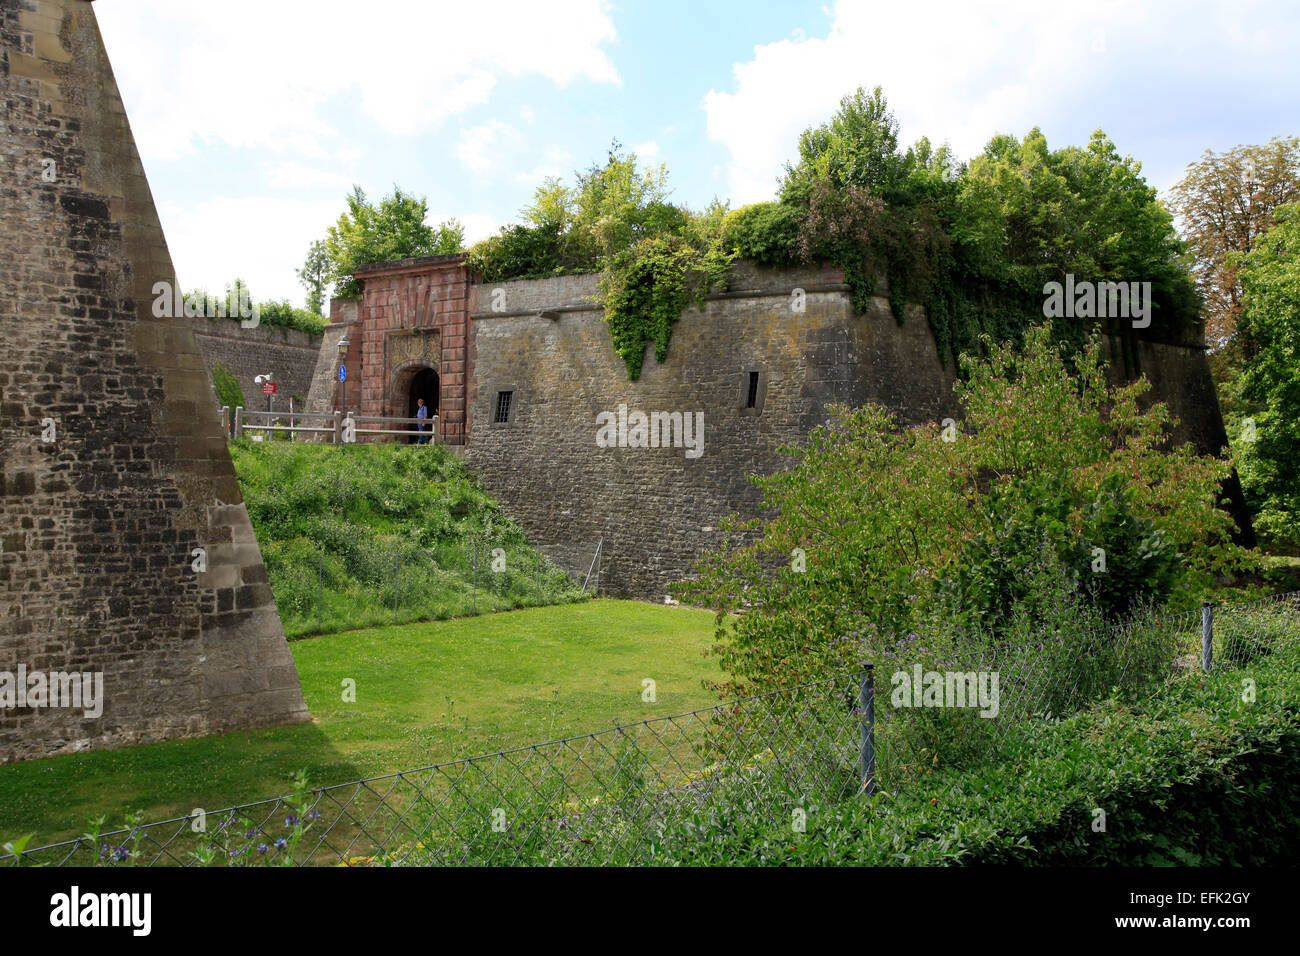 Fortifications of Marienberg Fortress in Wuerzburg. The fortress is surrounded by vineyards and overlooks the ancient university city with its domes, towers and bridges. Photo: Klaus Nowottnick Date: August 11, 2012 Stock Photo